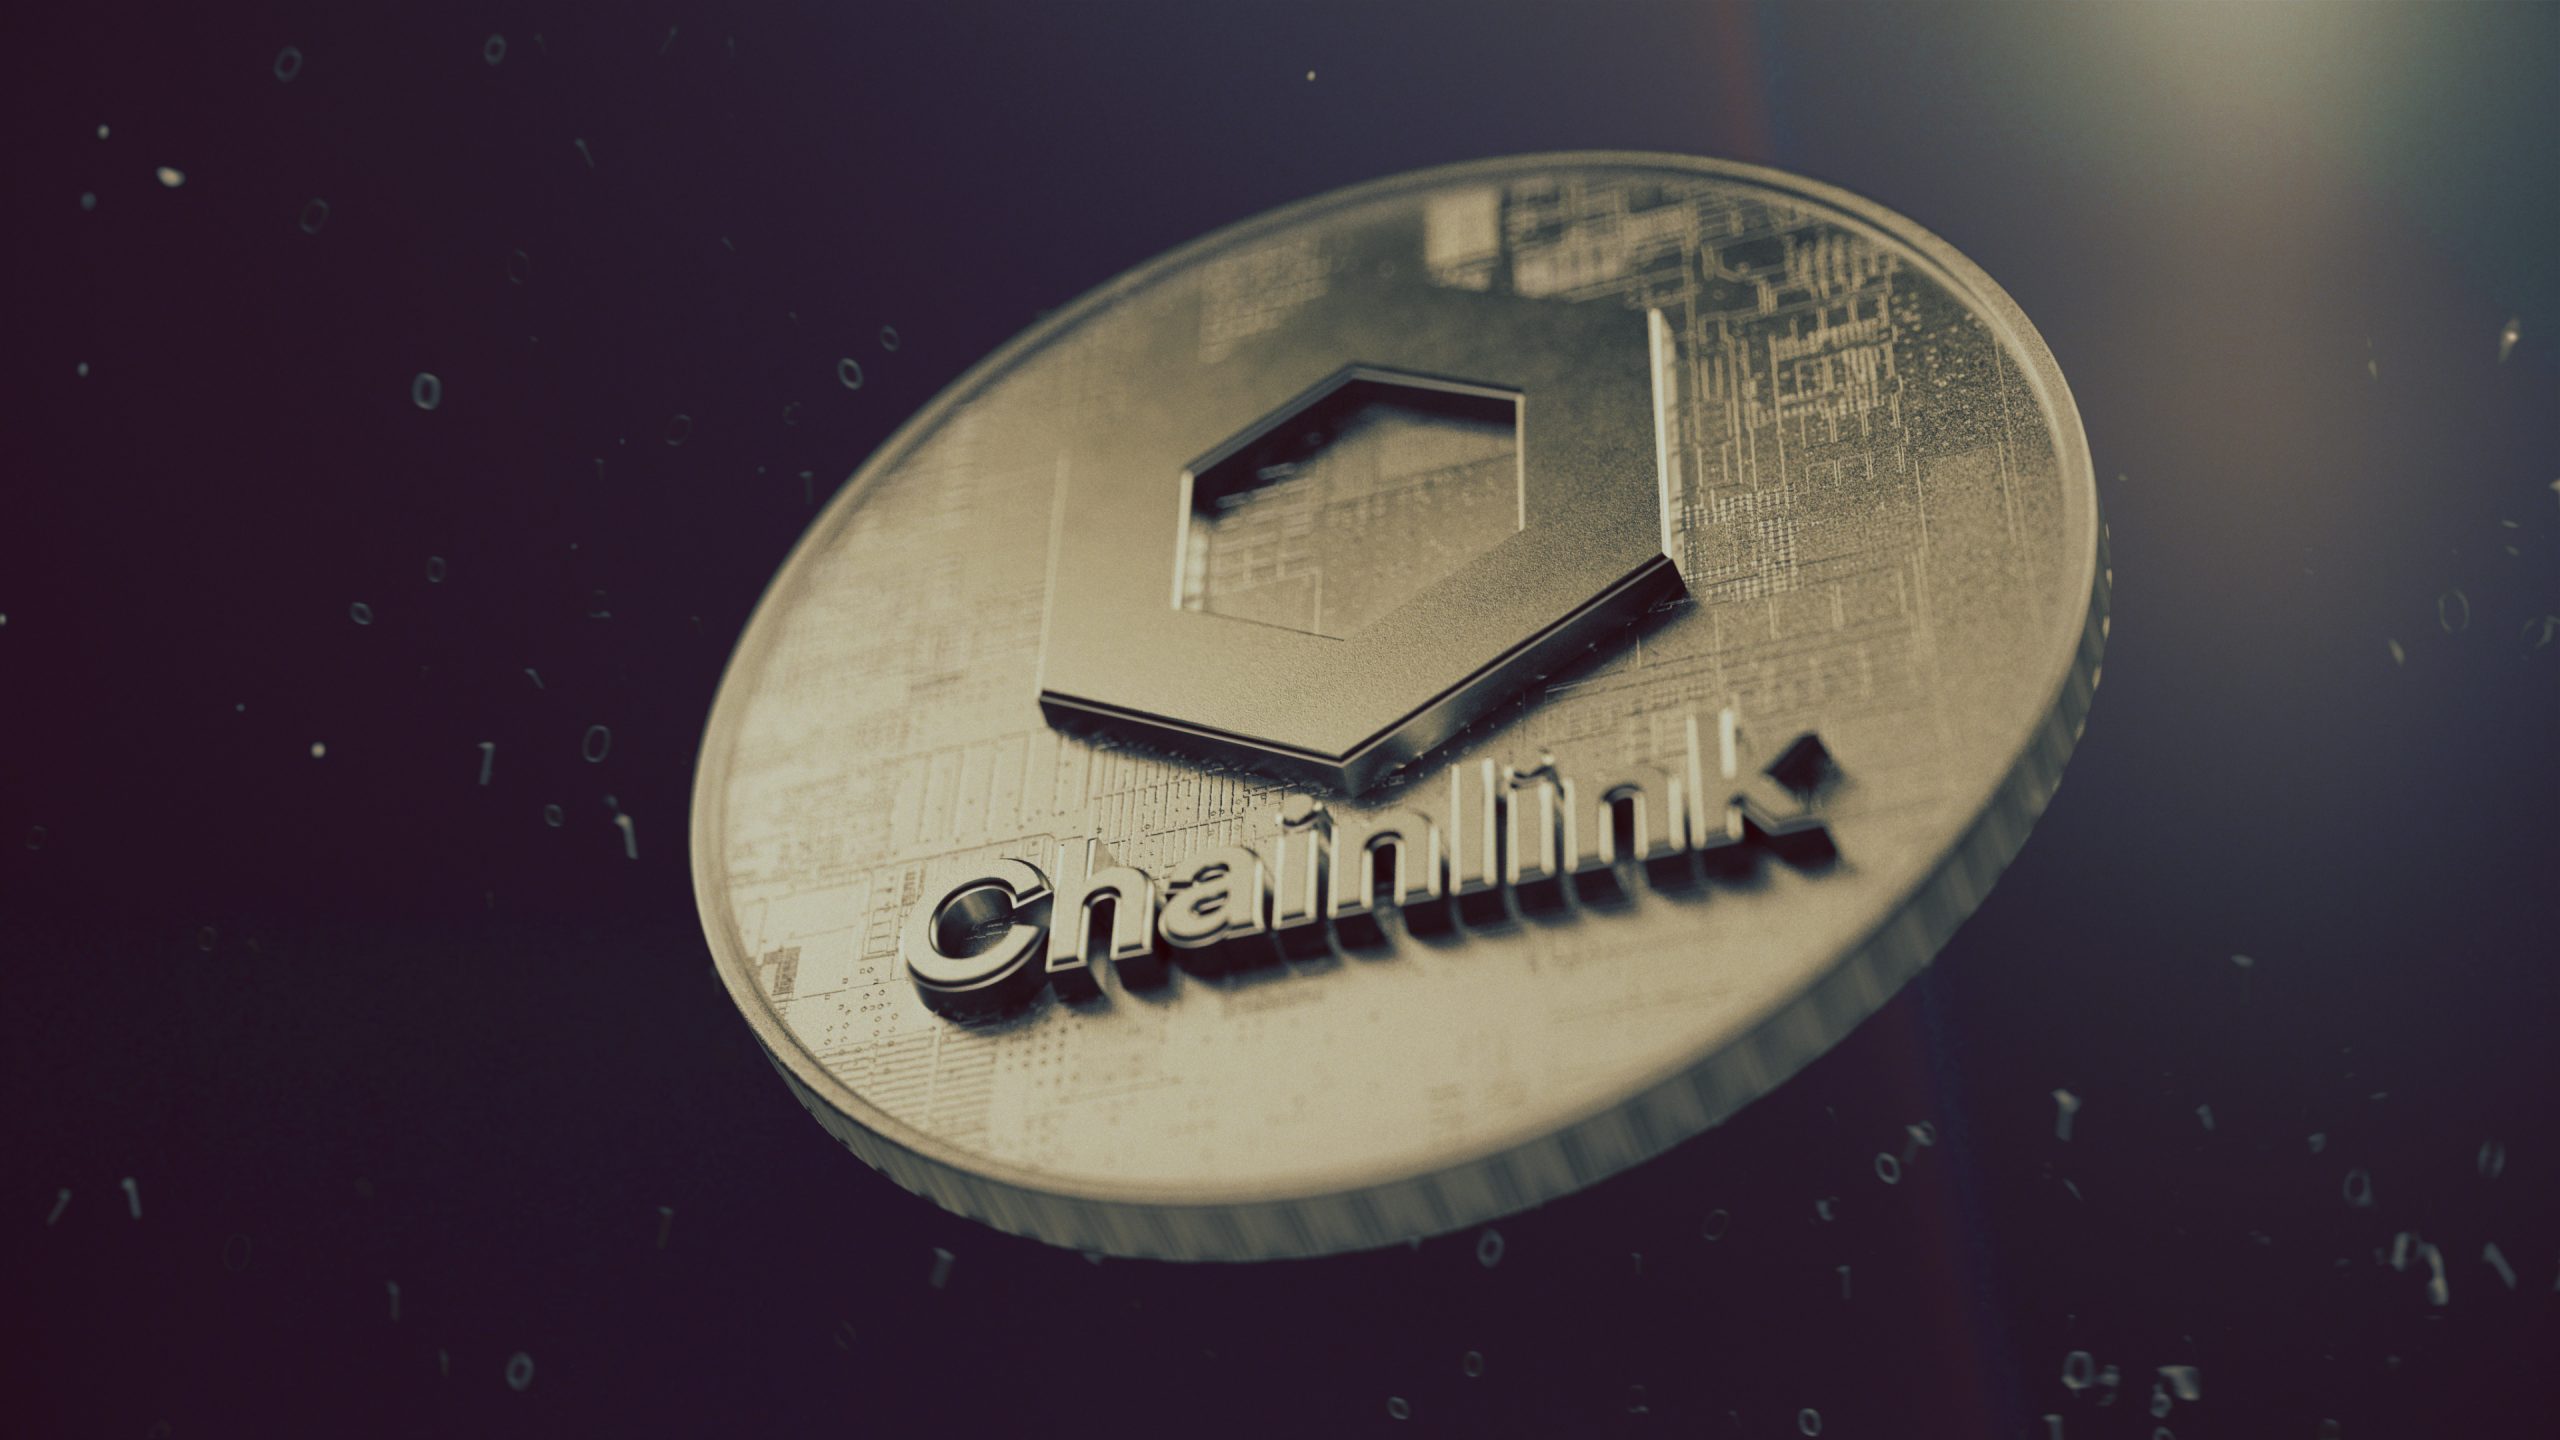 What is Chainlink?